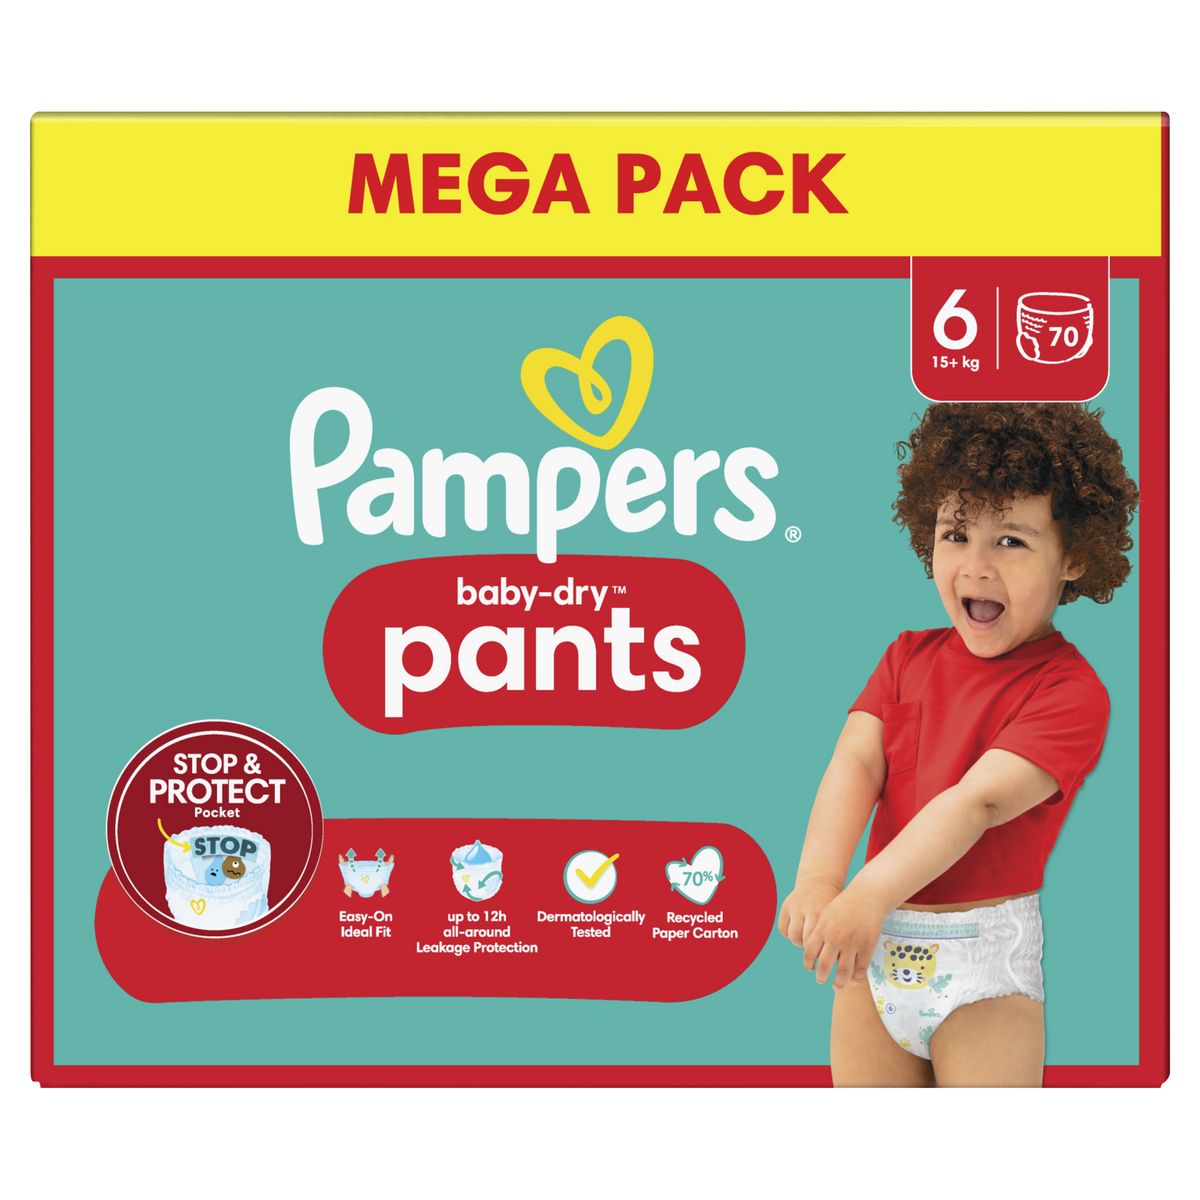 pampers 2 3-6